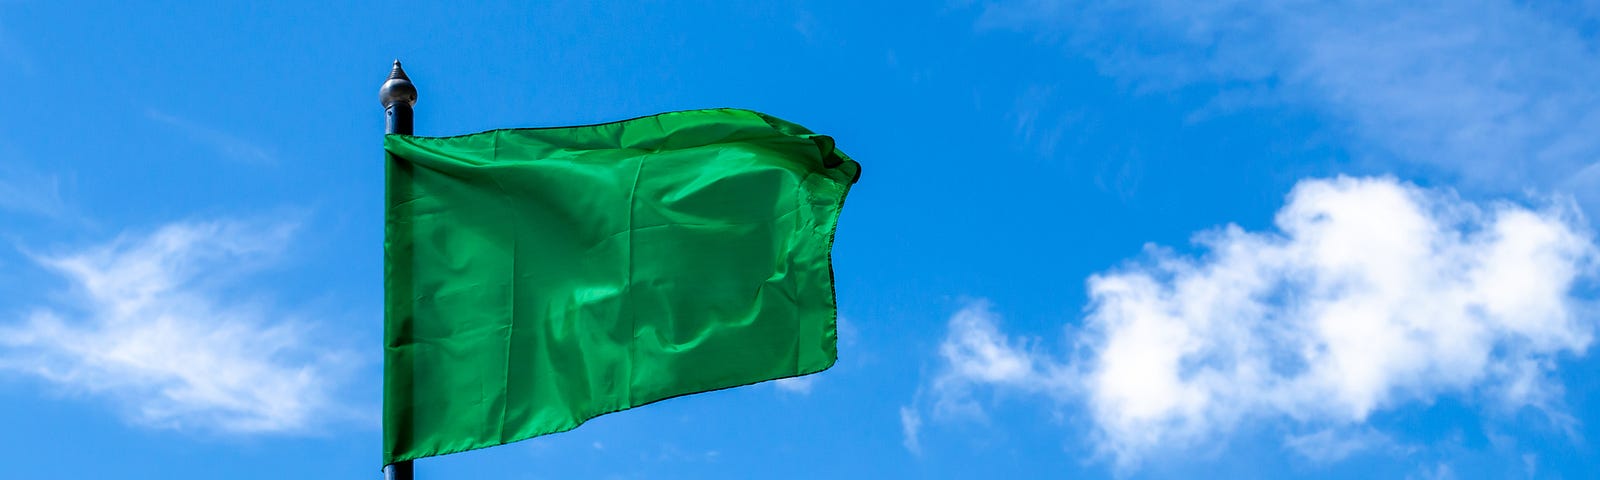 A large green flag flying at the top of a flagpole, against a blue sky.